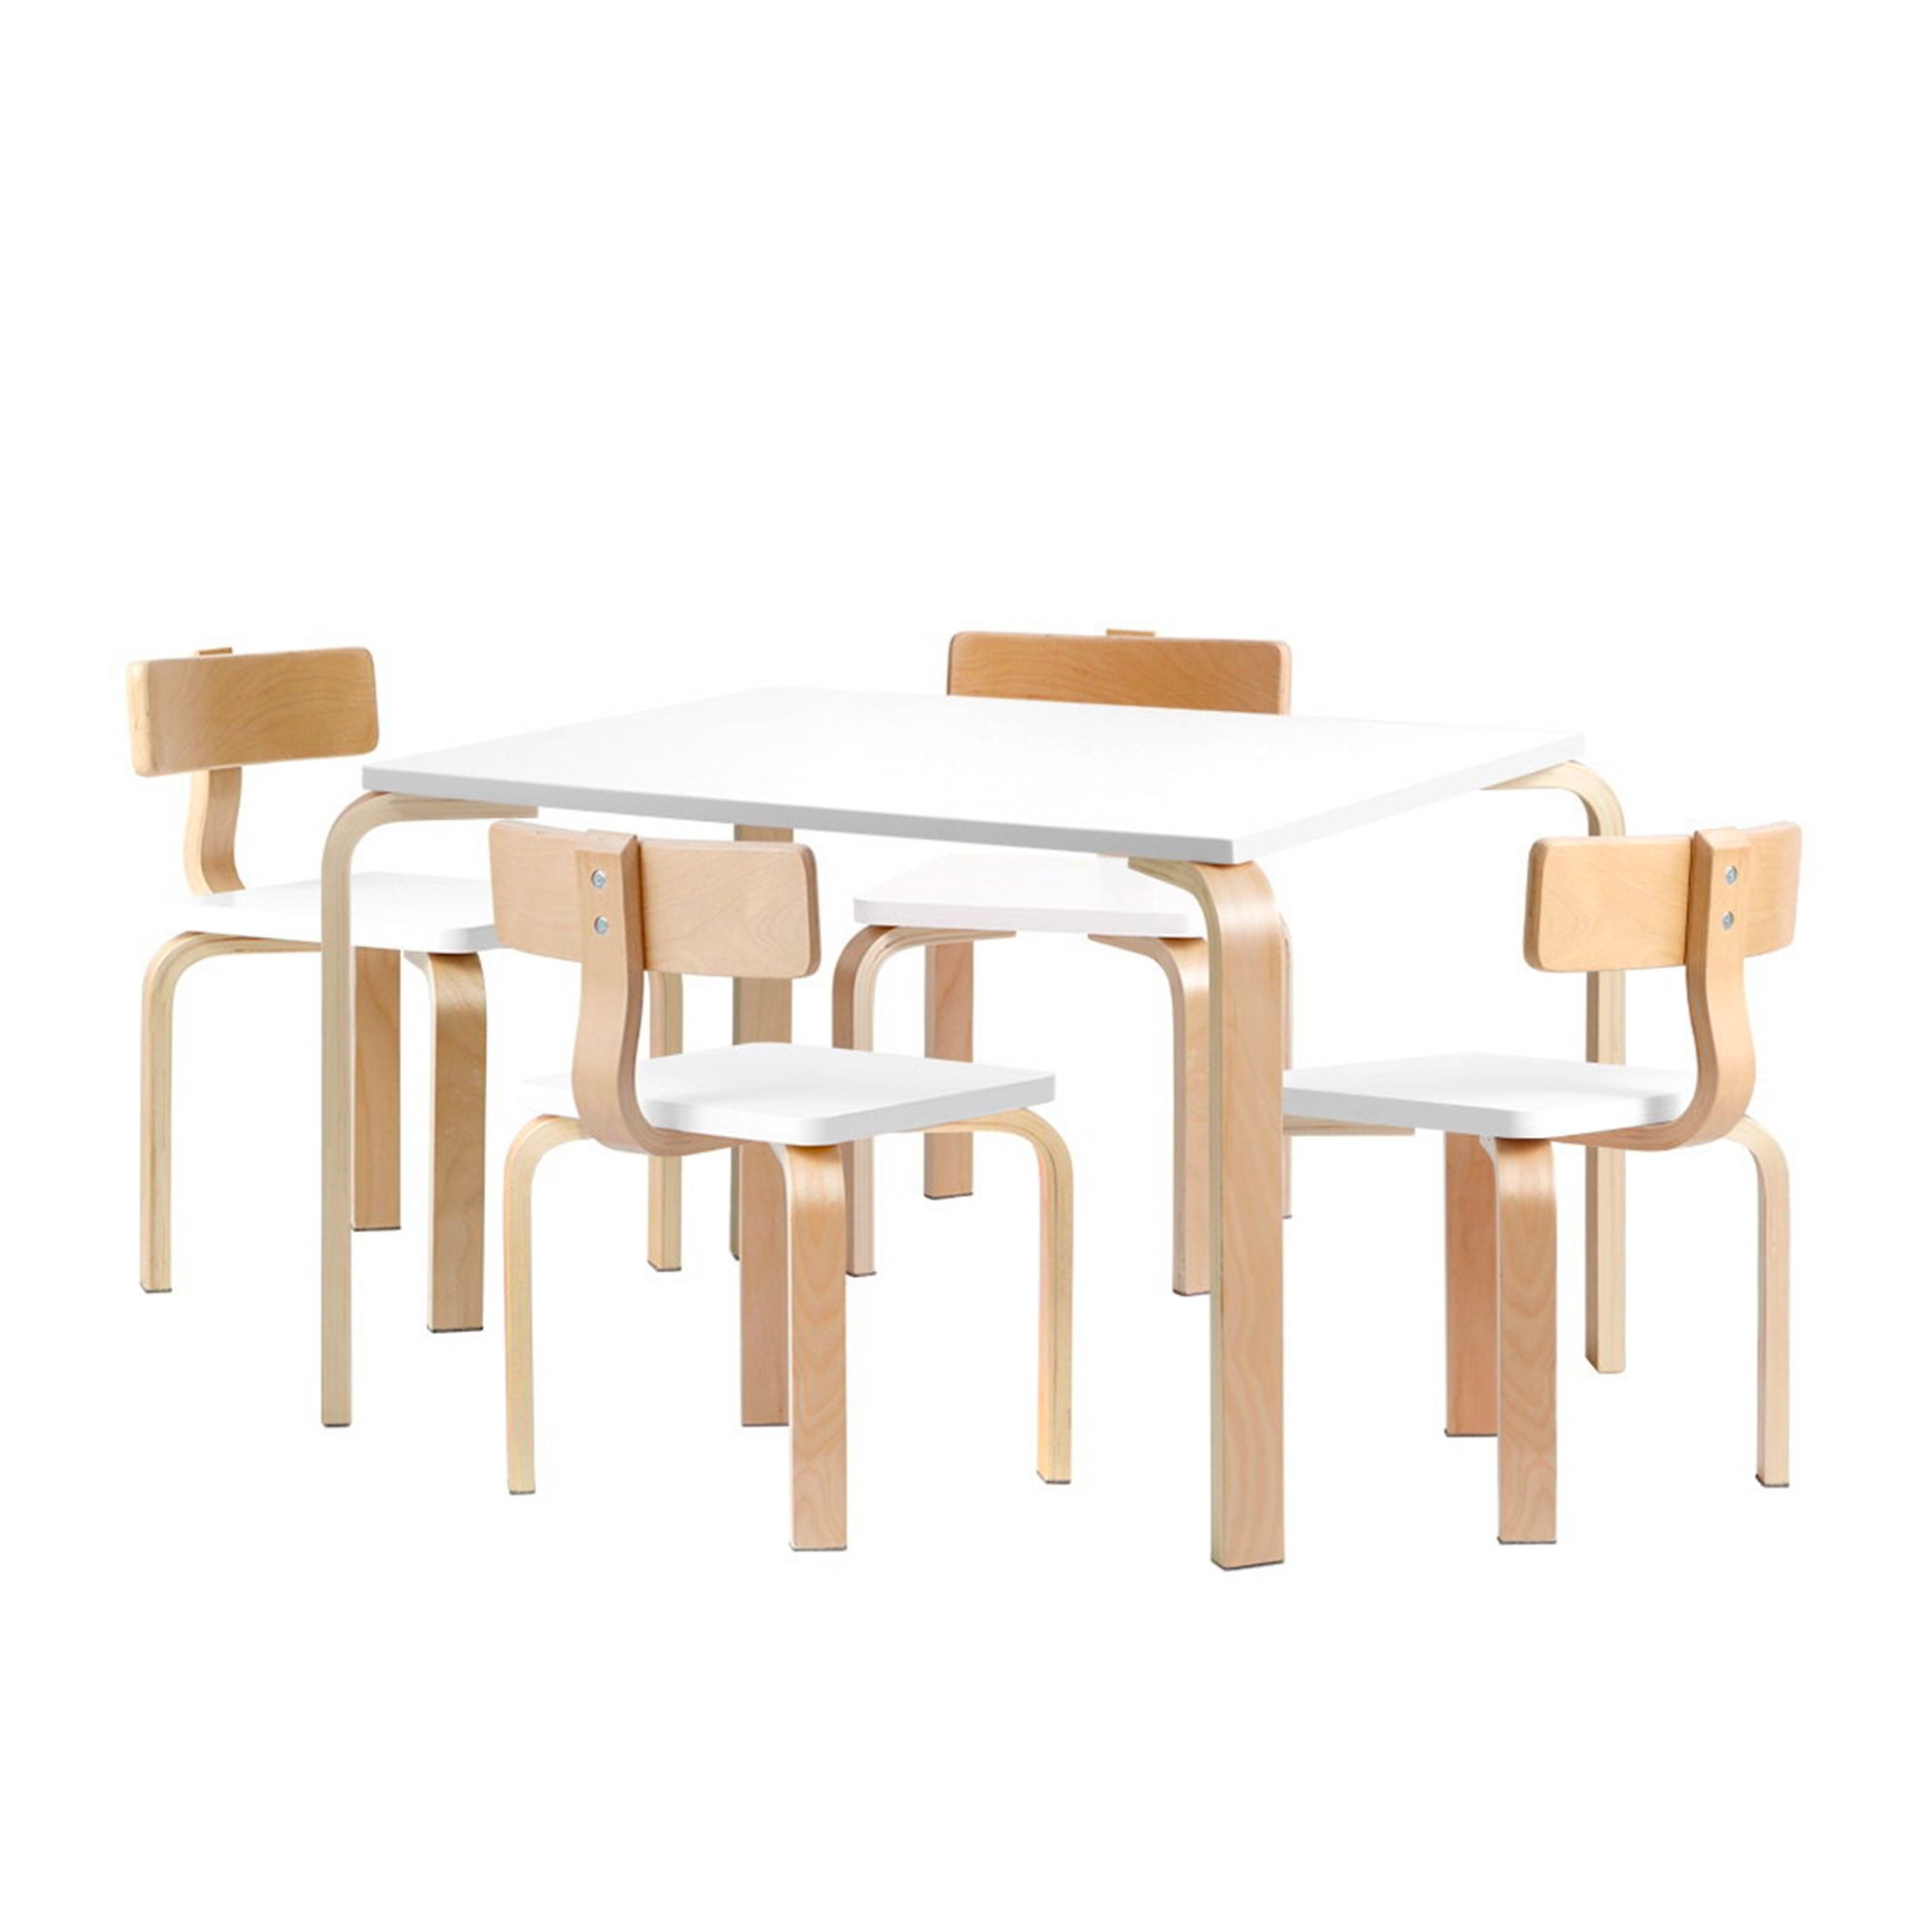 Keezi Nordic Kids Table and Chair 5pc Set Image 1